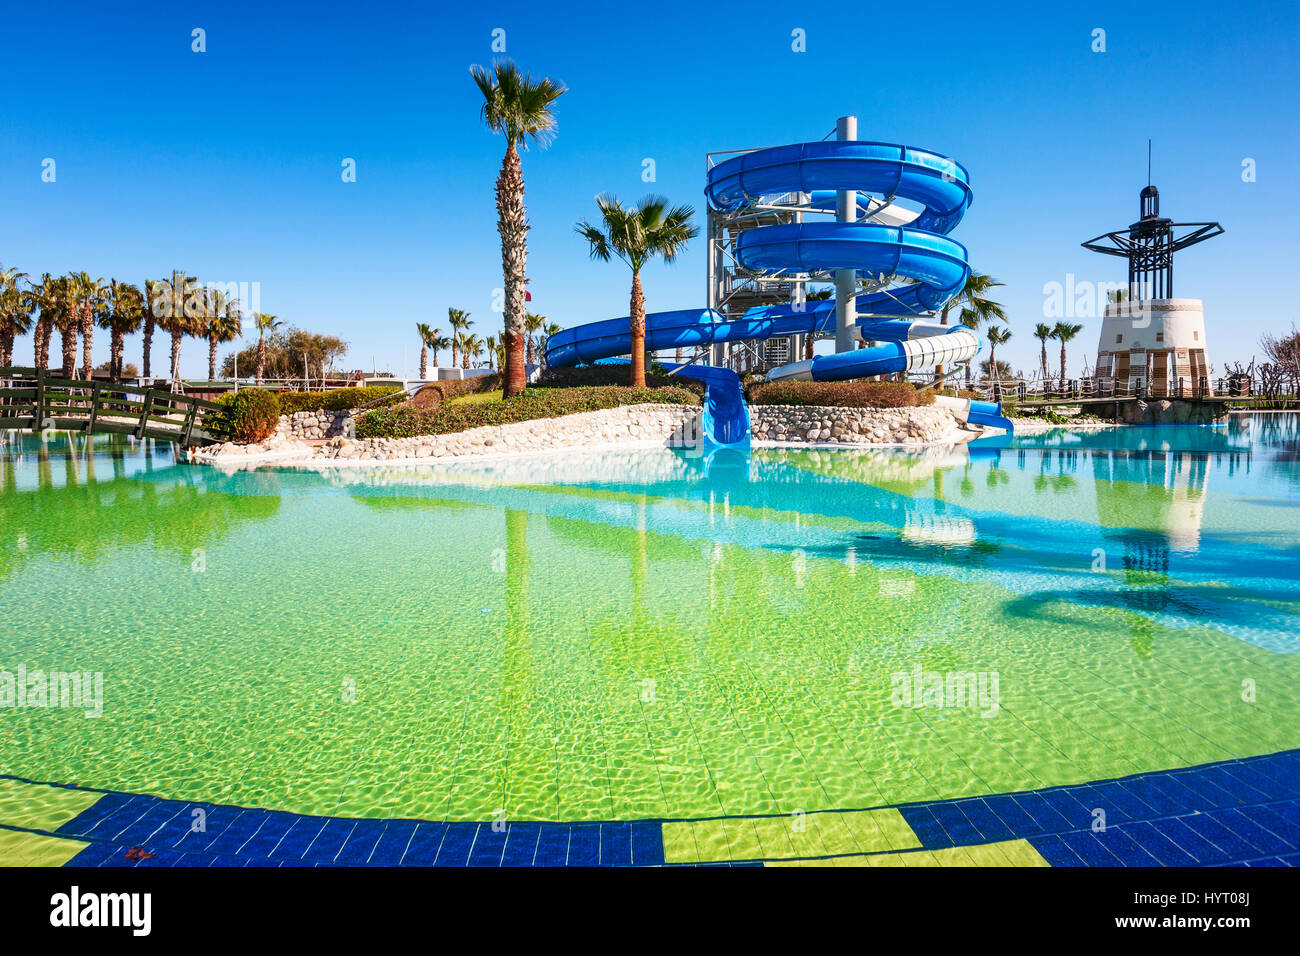 Water park slide and swimming pool in luxury exotic resort Stock Photo